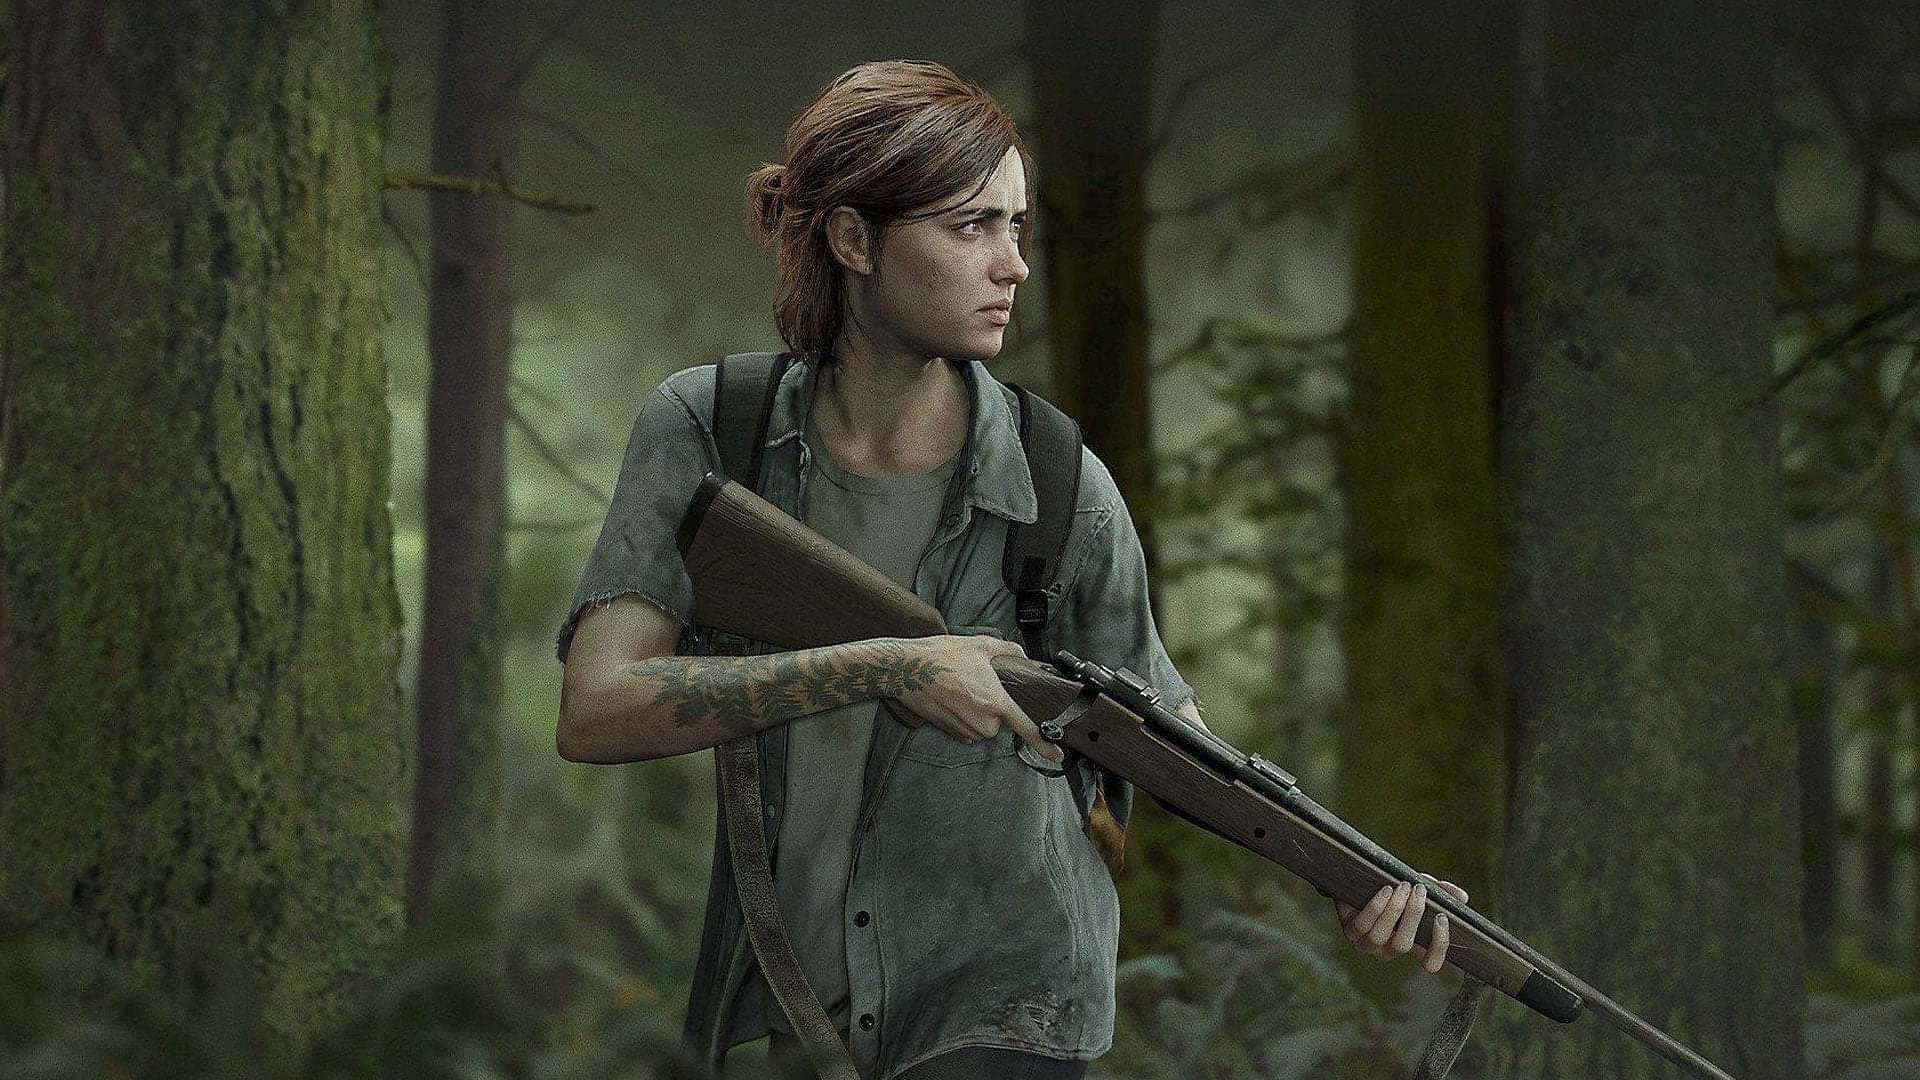 Wallpaper : The Last of Us, The Last of Us 2, Naughty Dog